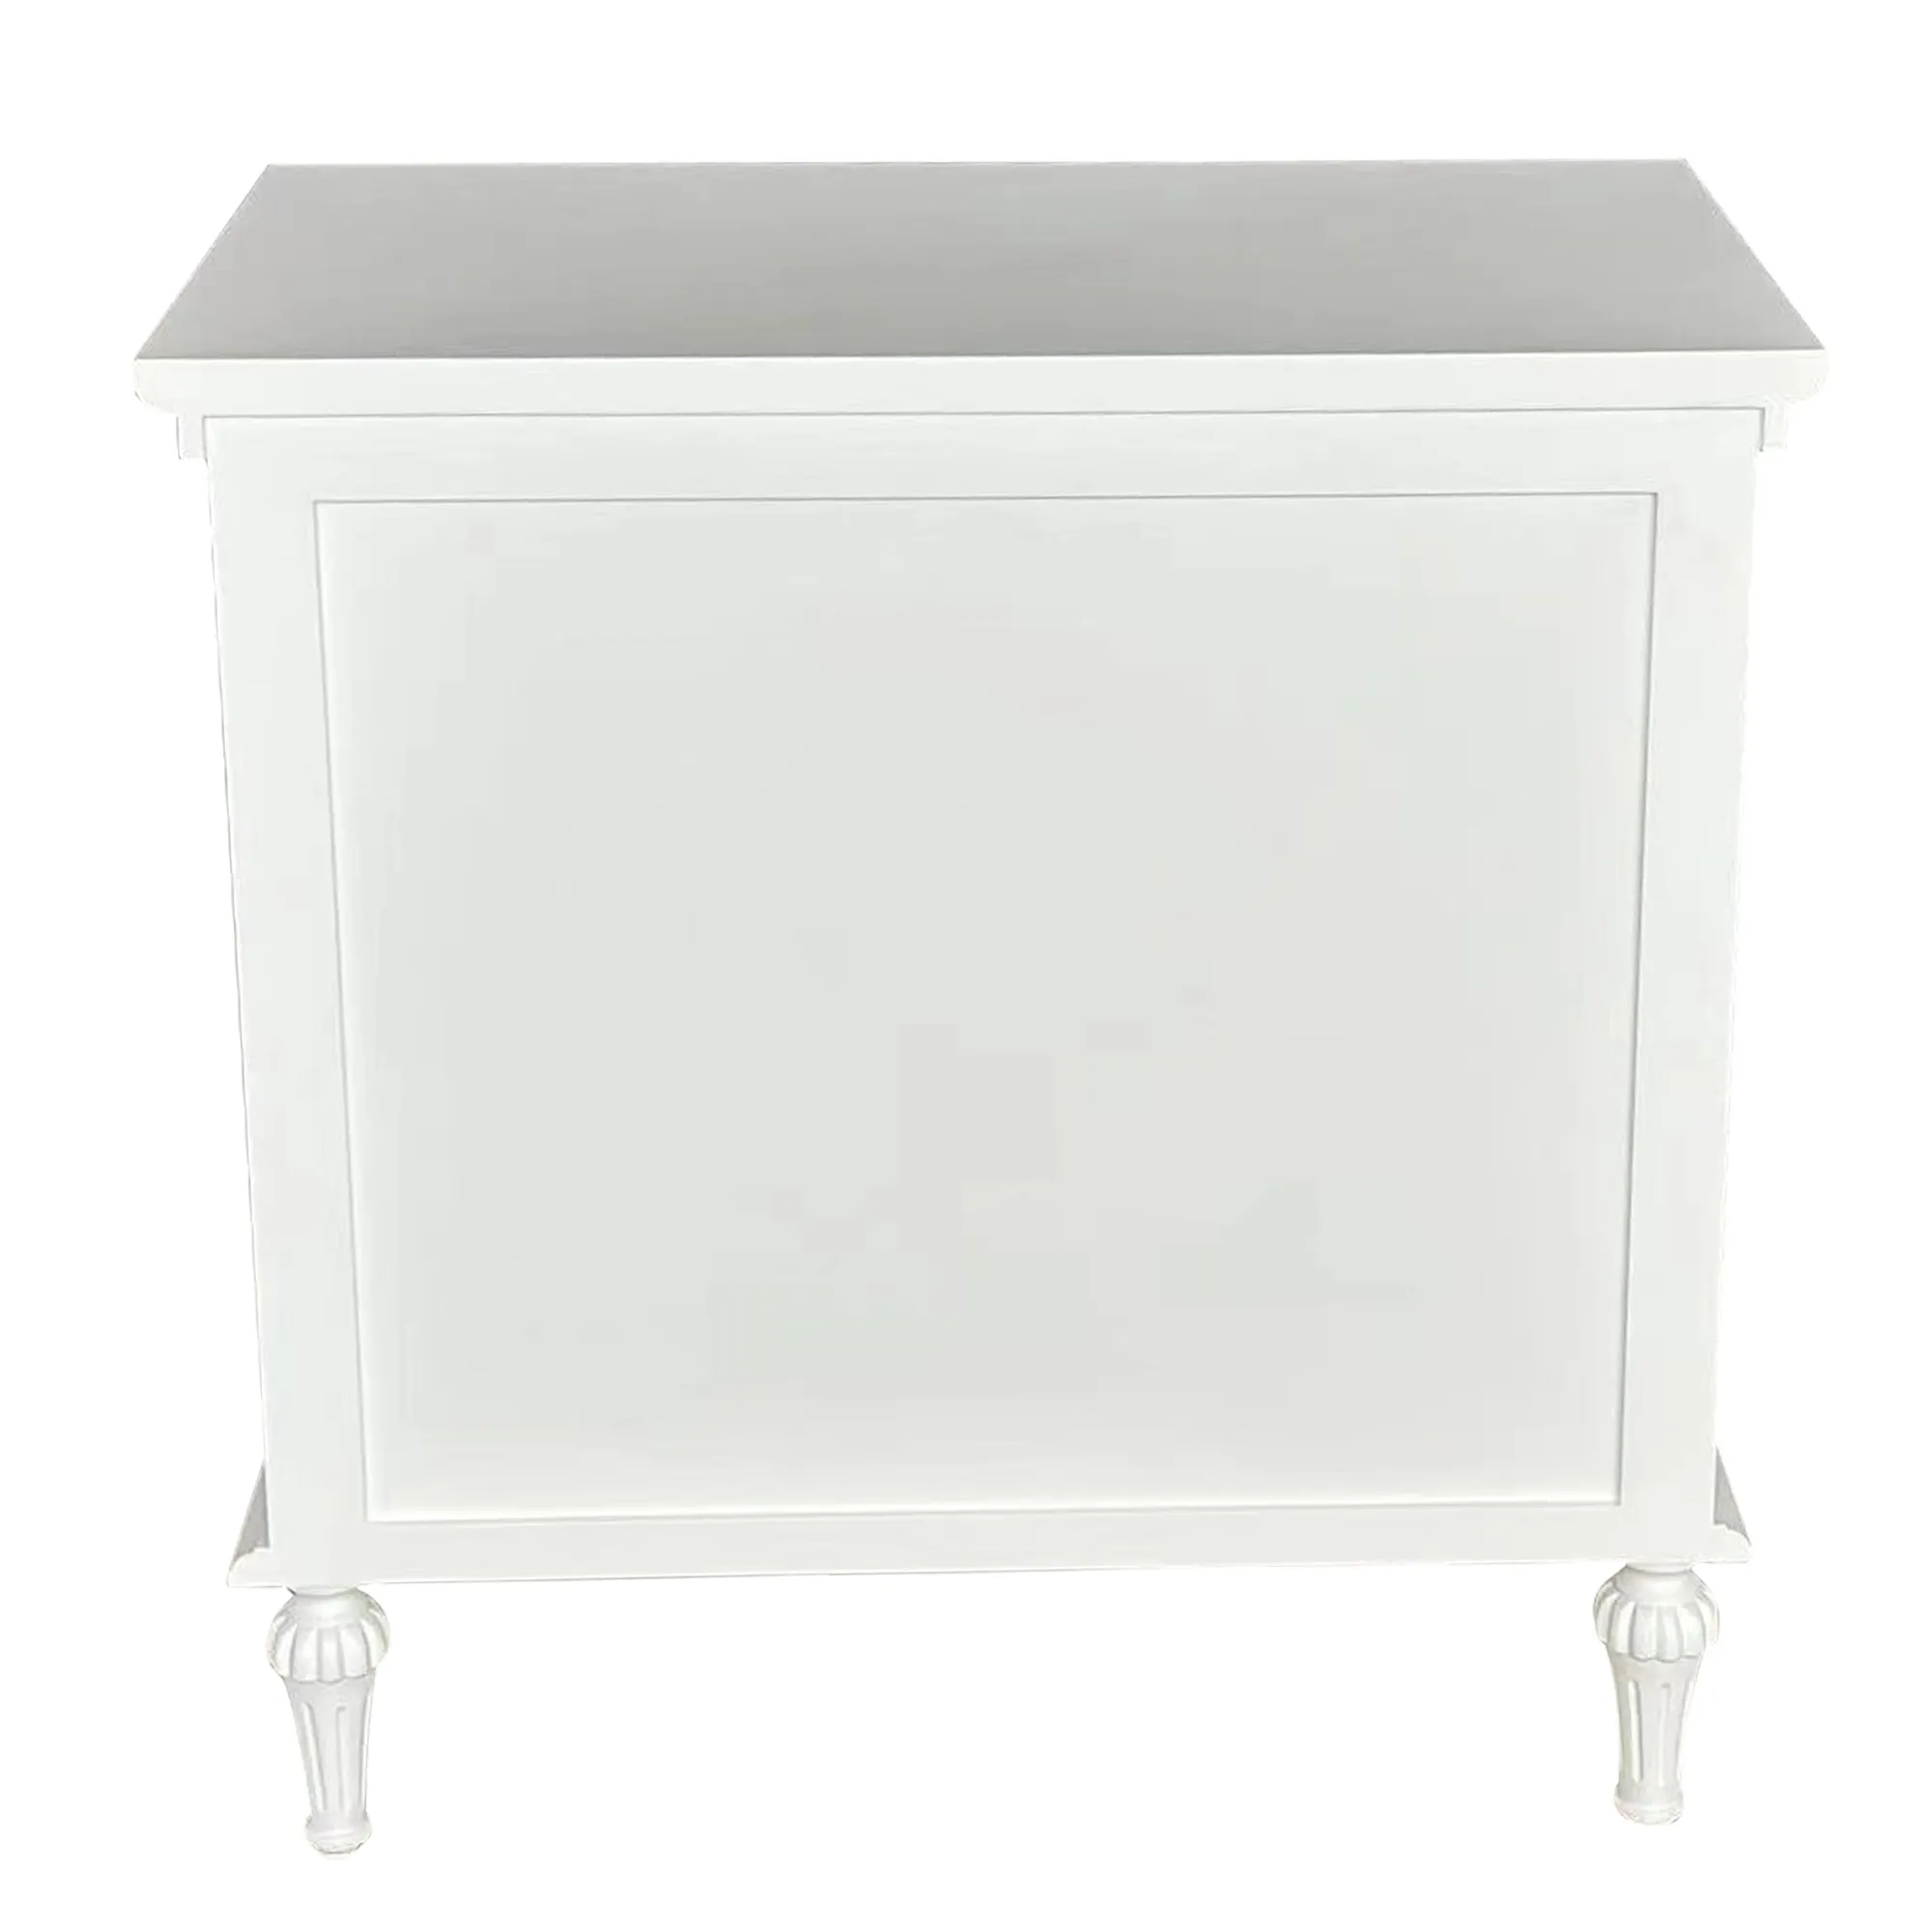 Traditional Design Vintage Hamptons Style White Solid Birch Wood Nightstand Bedside Table Cabinet with Drawers HL129-75